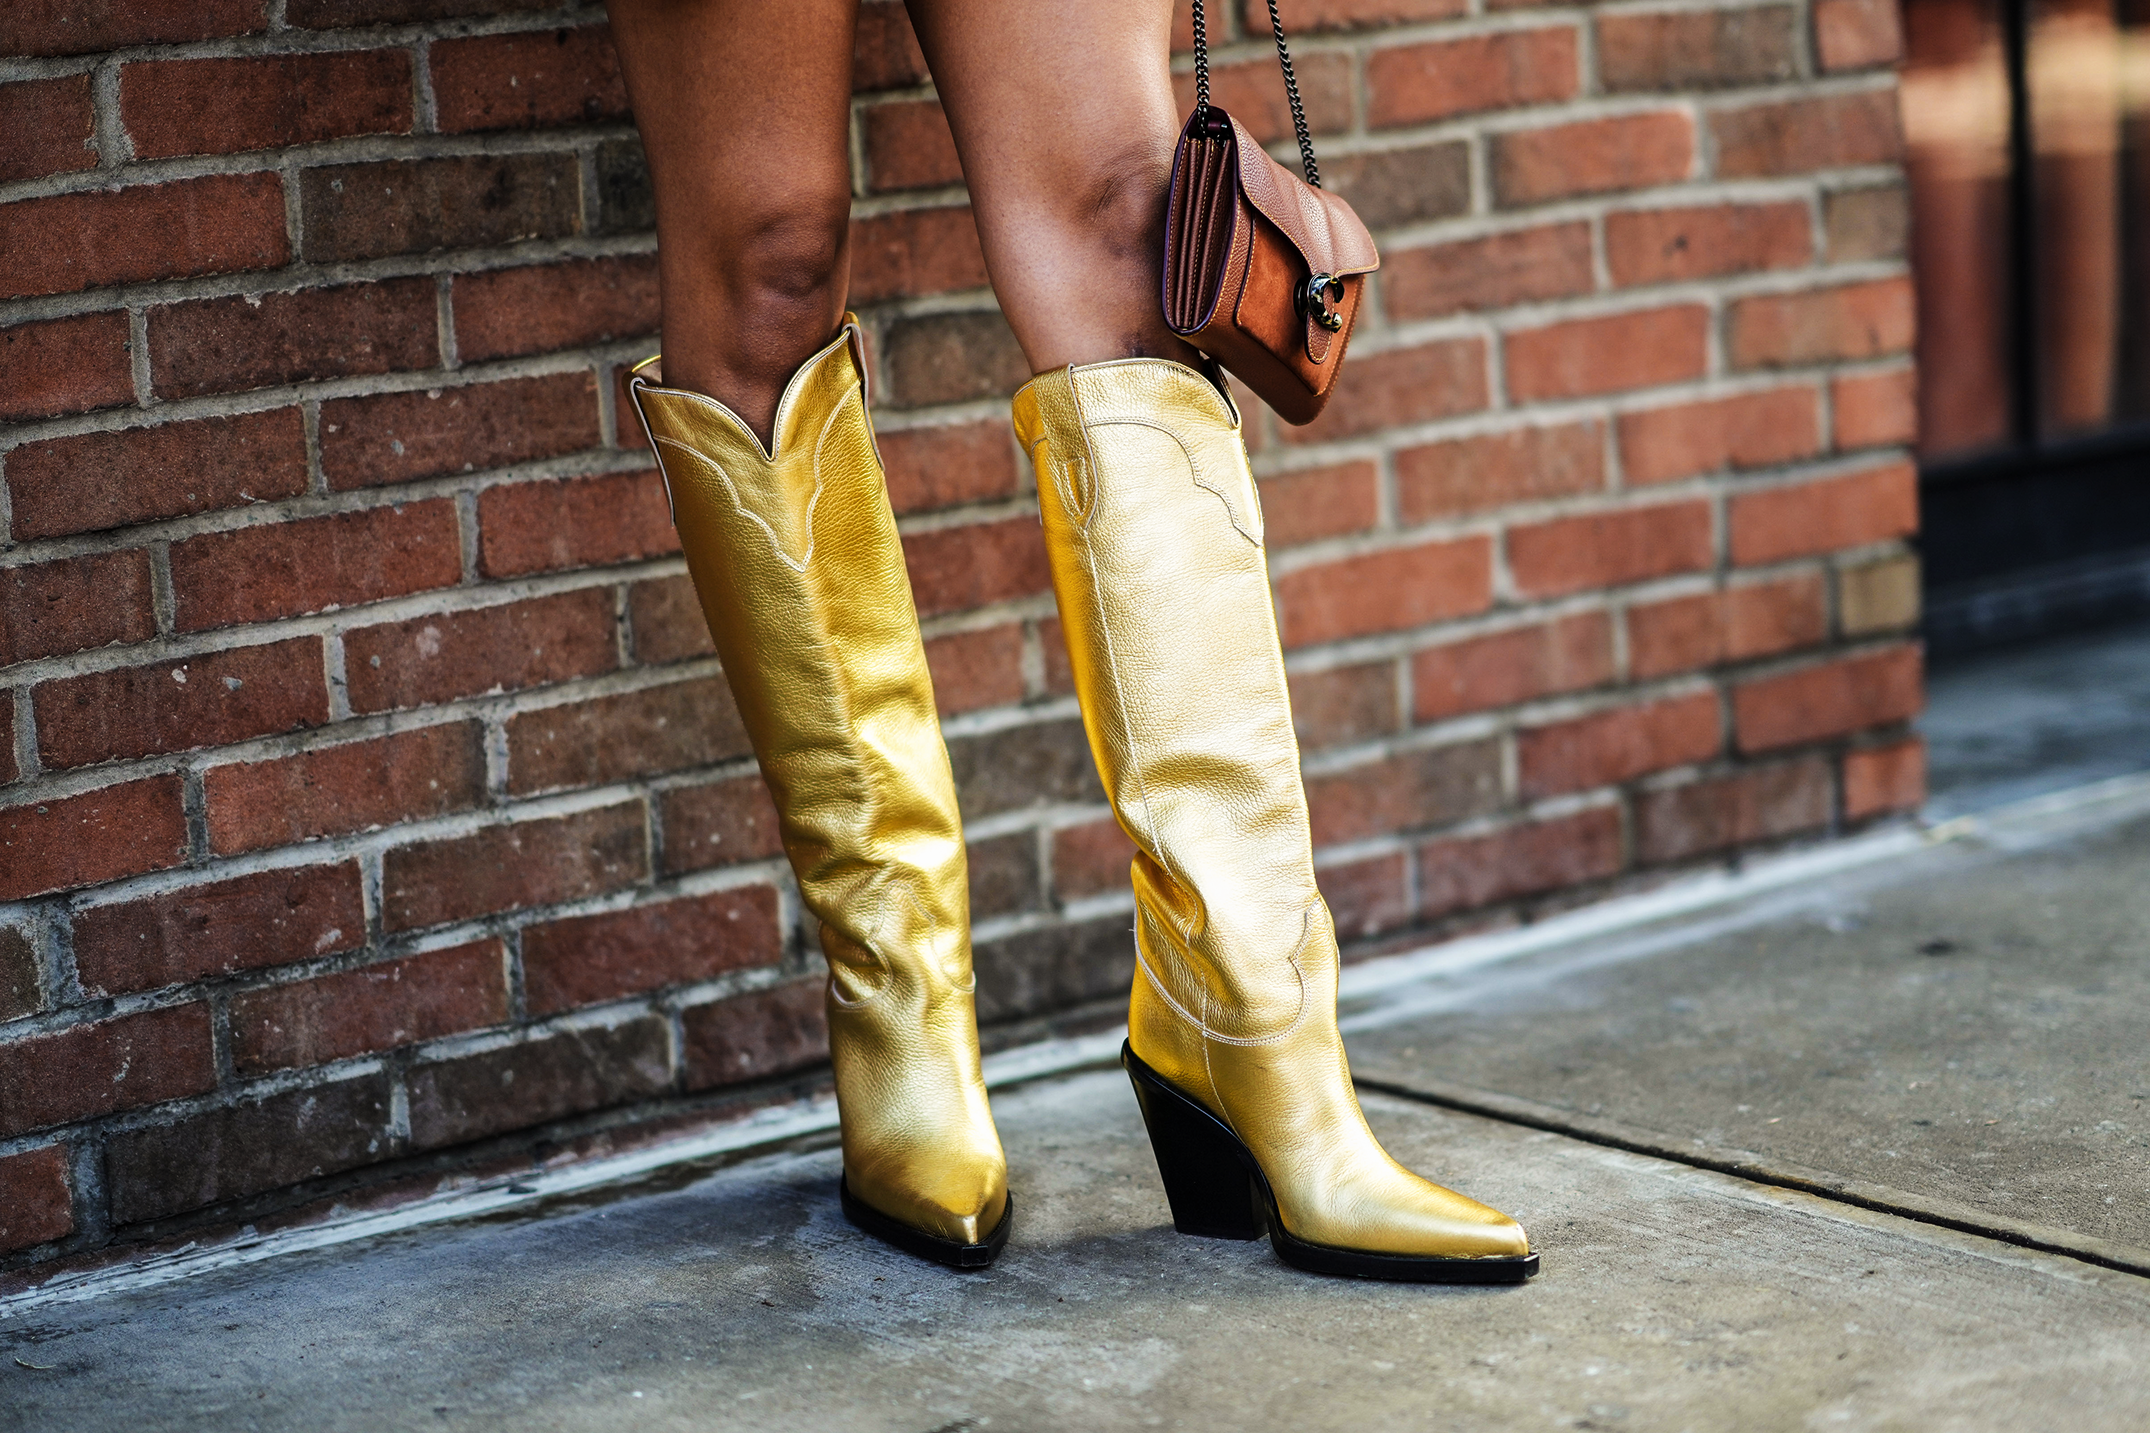 How Should I Style Cowboy Boots? - The New York Times